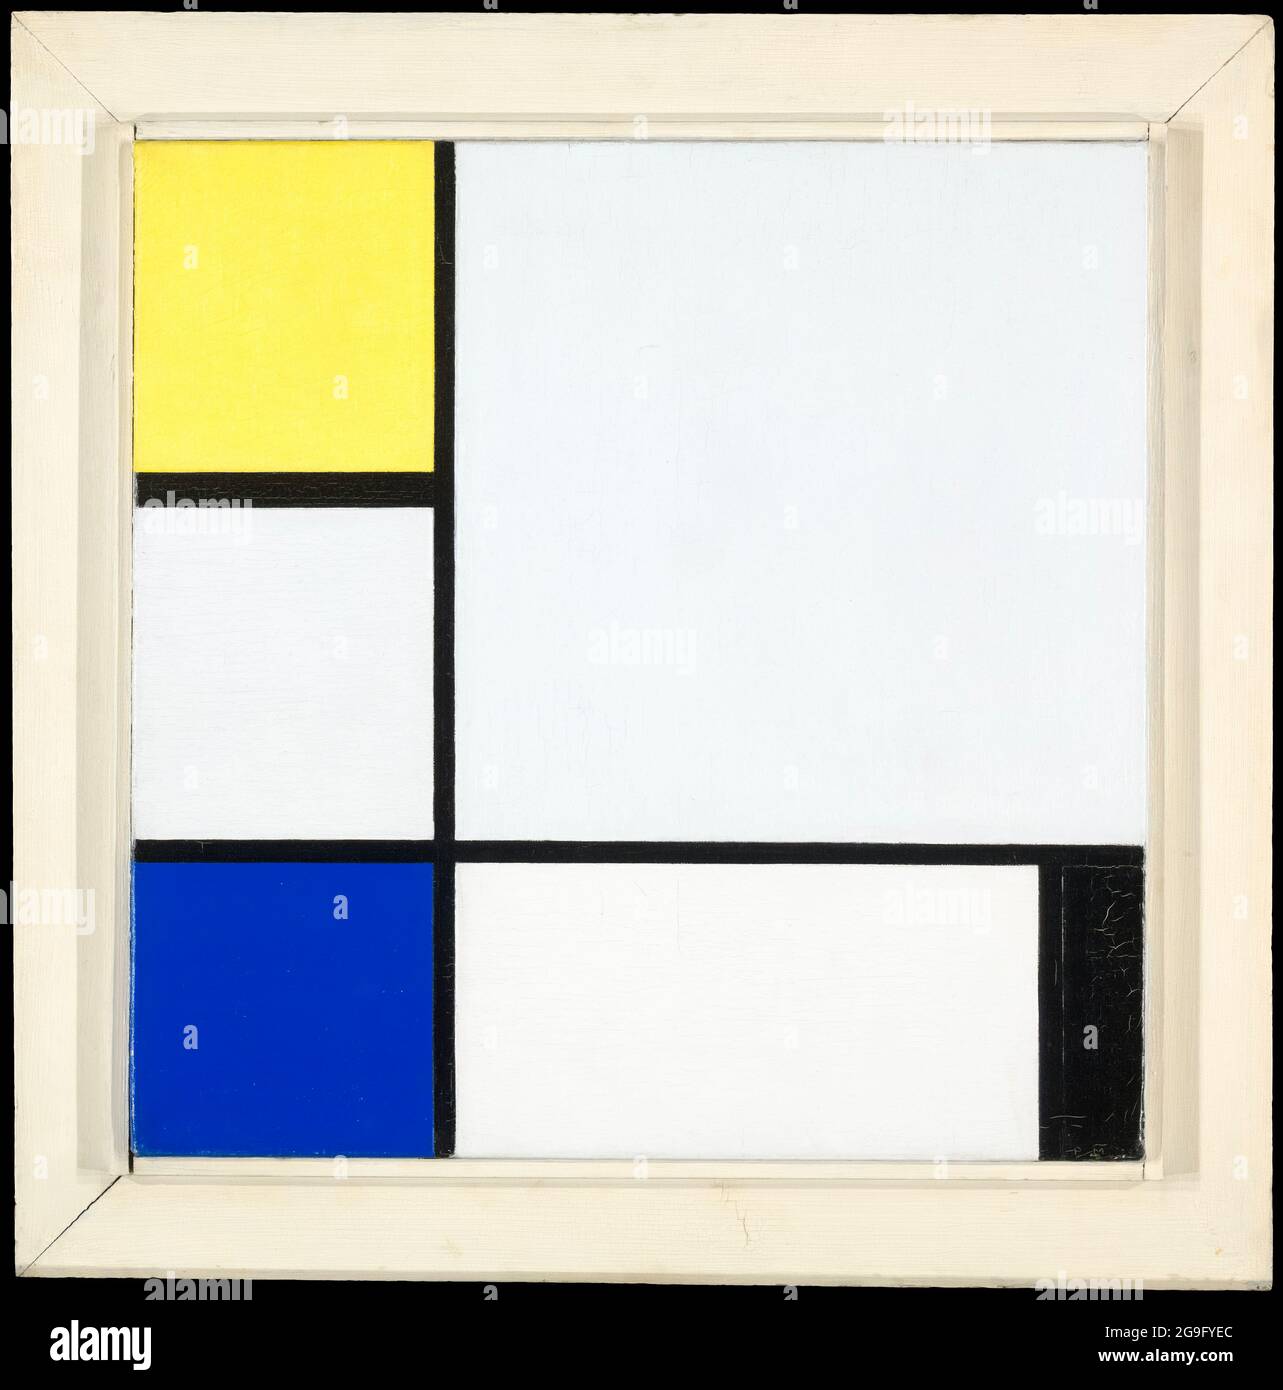 Piet Mondrian (Piet Mondriaan), Composition with Yellow, Blue, Black and Light Blue, abstract painting, 1929 Stock Photo